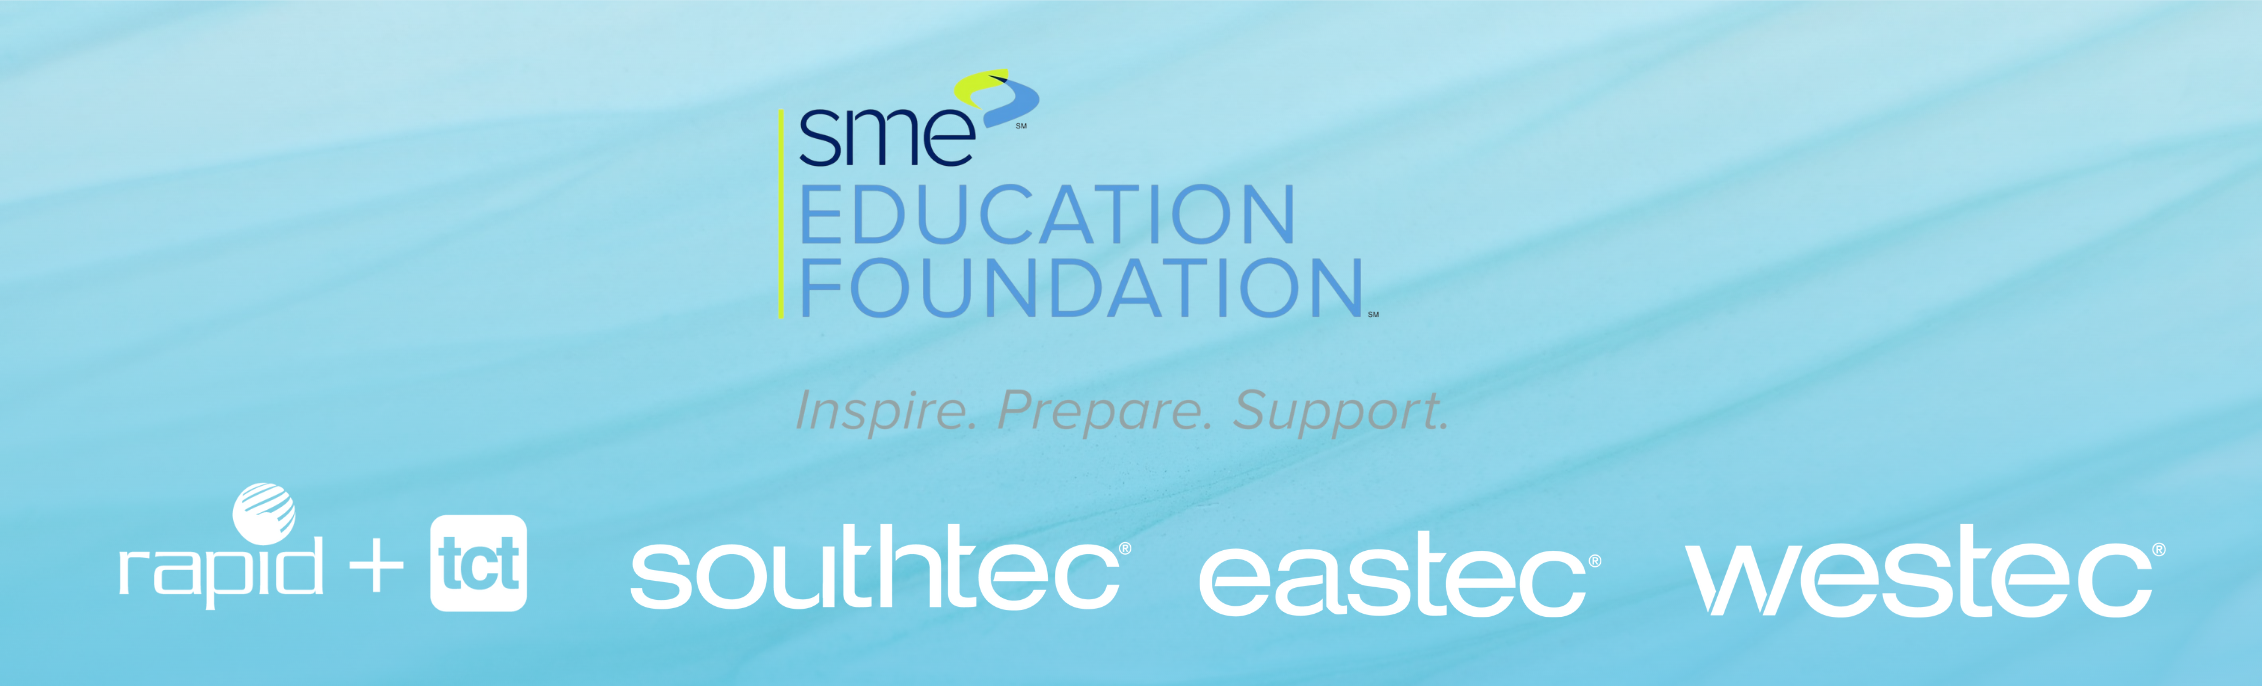 SME and Edge Factor partner to inspire students with virtual events 